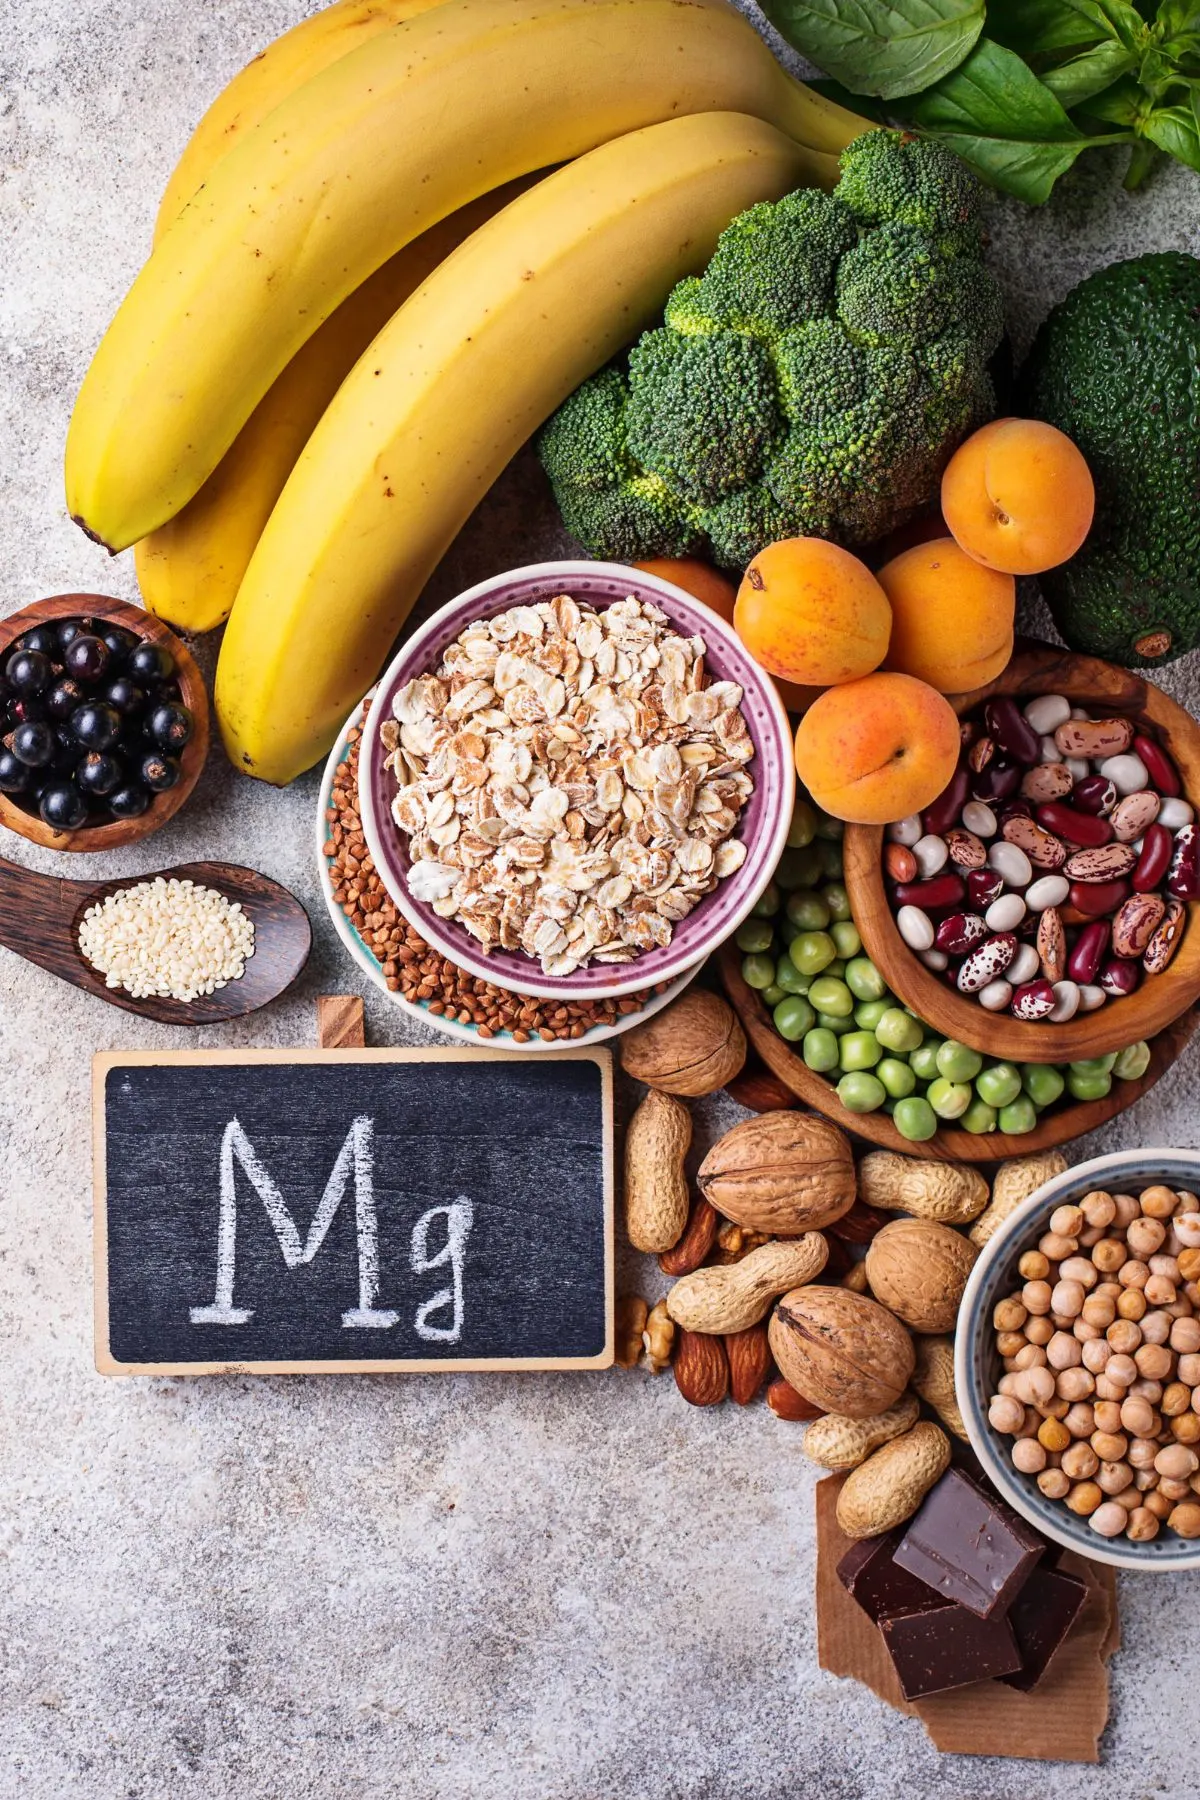 The letters "Mg" on a chalkboard surrounded by healthy fruits, vegetables, nuts, and seeds.